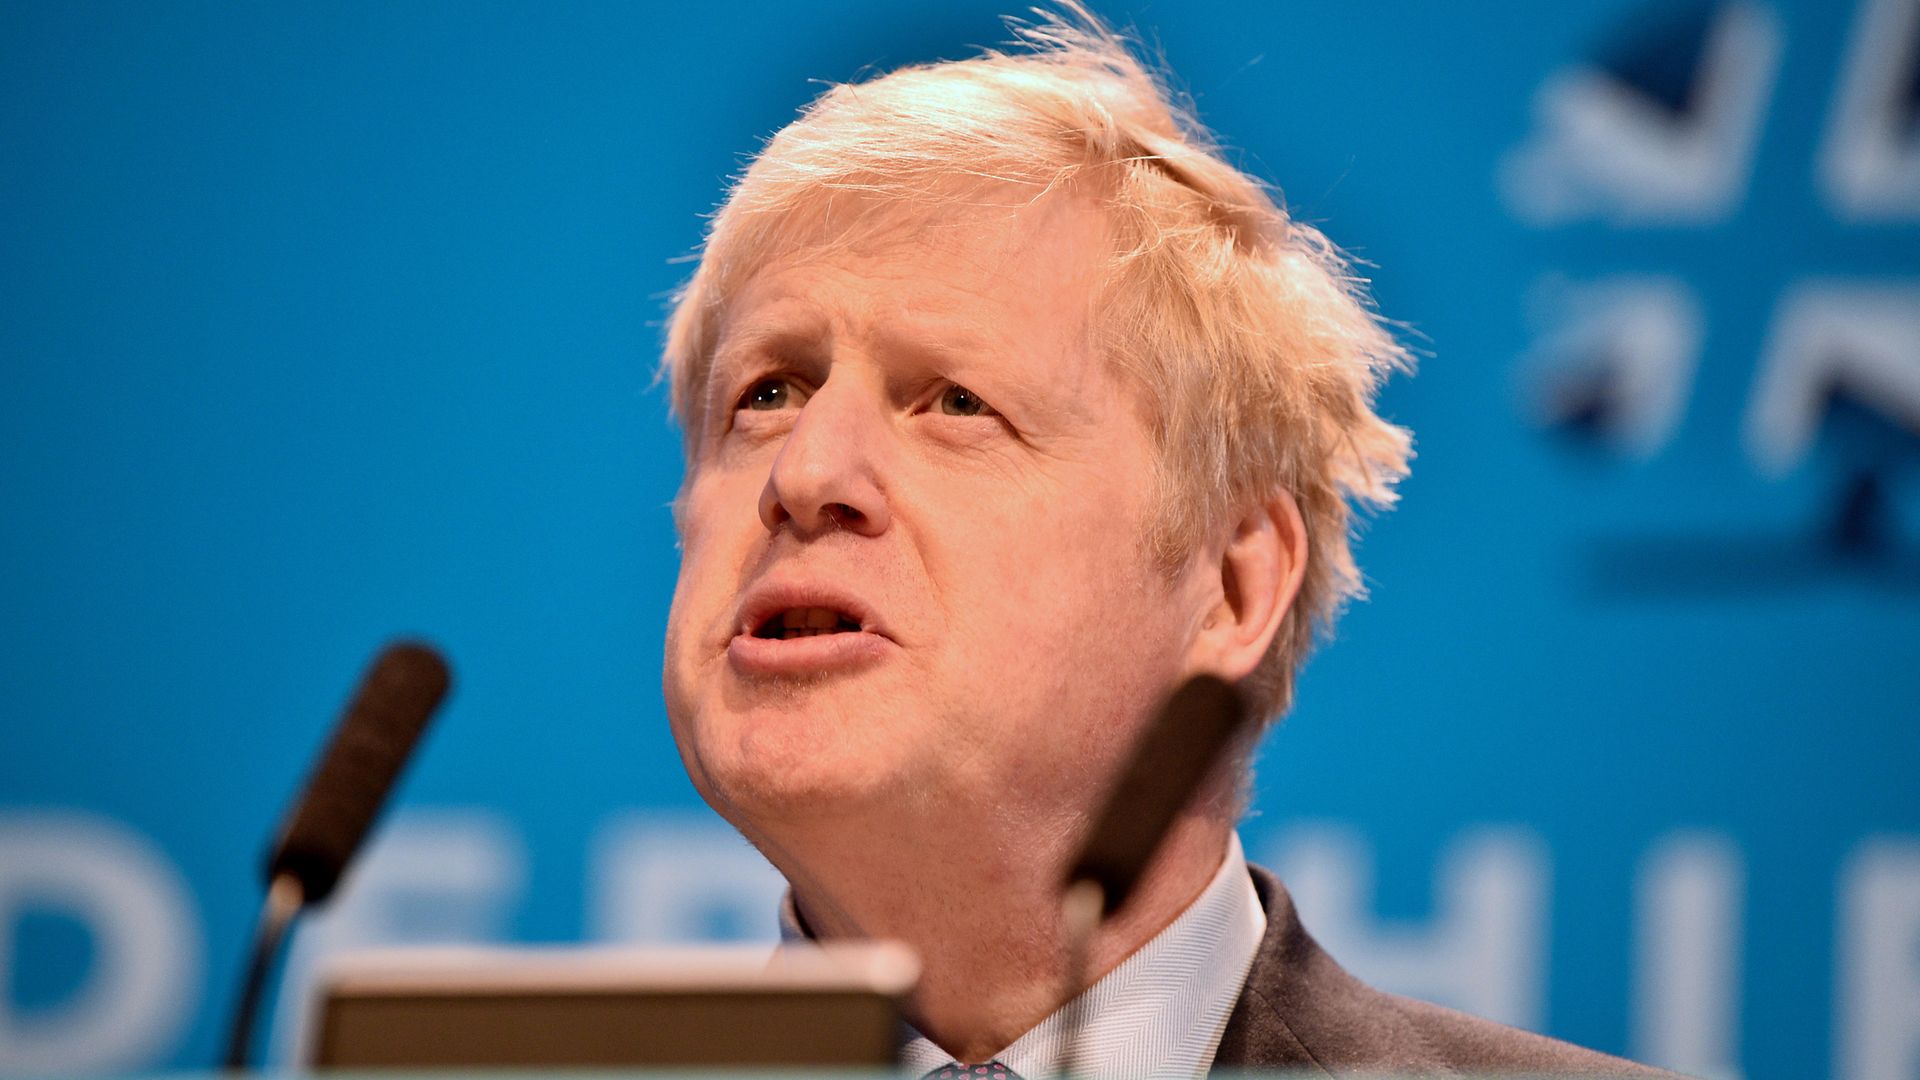 Boris Johnson during the Conservative Party leadership hustings - Credit: PA